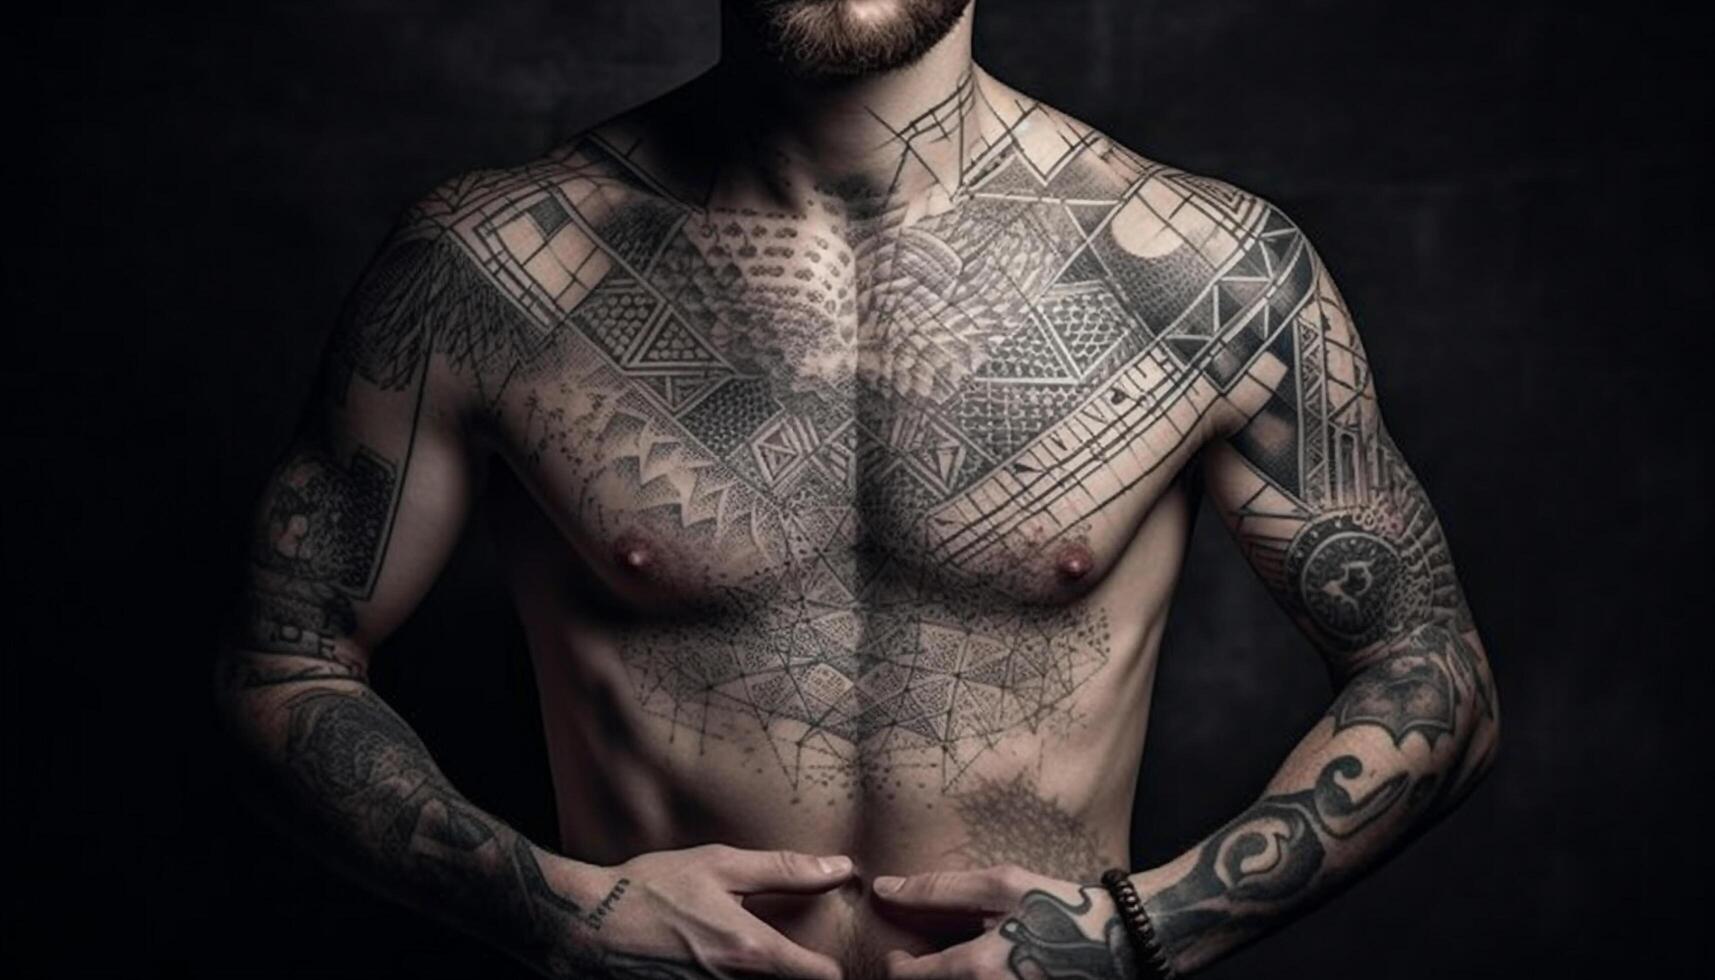 Inked athlete exudes masculinity and confidence generated by AI photo